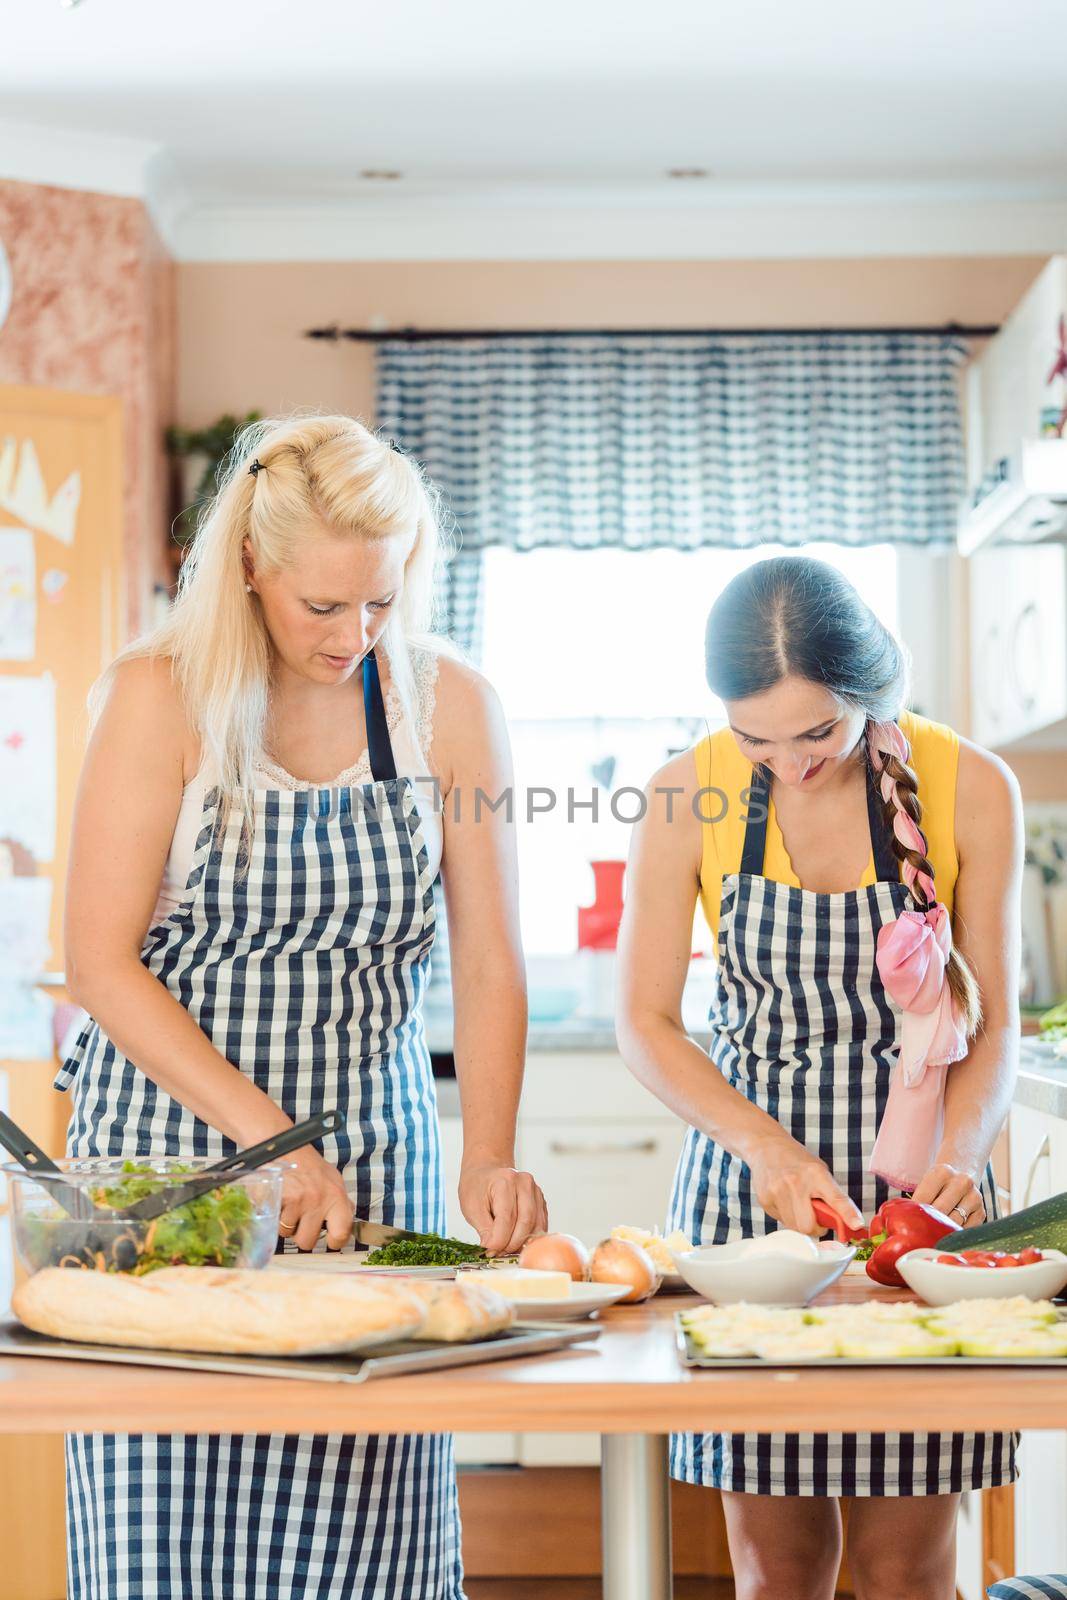 Two women preparing dishes in the kitchen looking into the camera